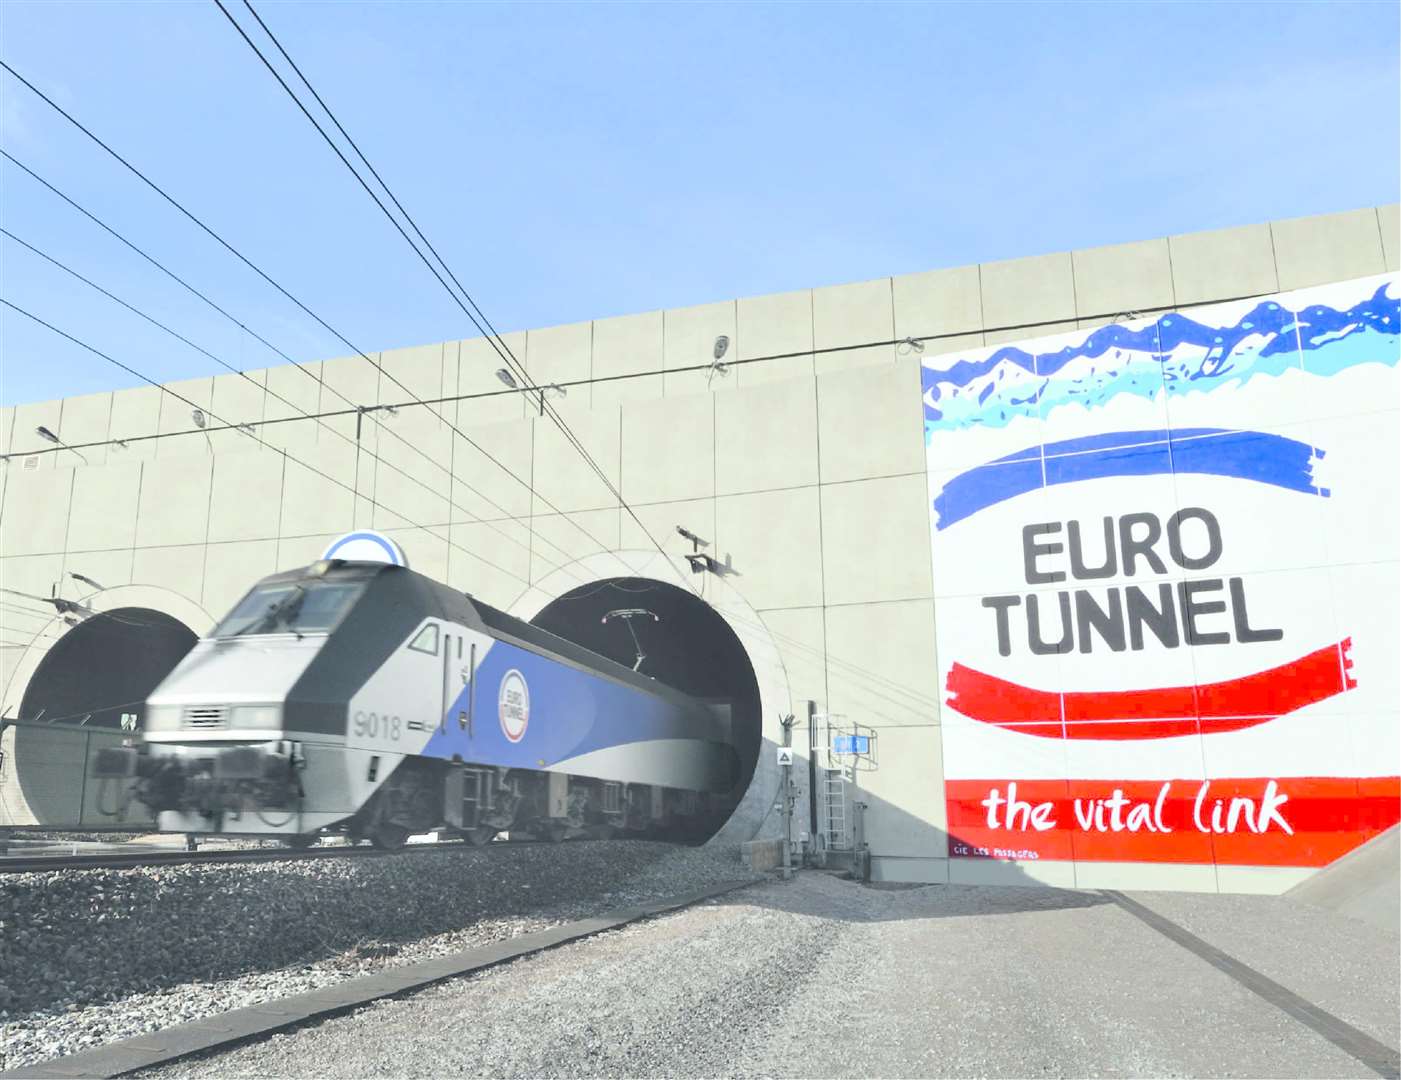 Eurotunnel has been given a £33m out-of-court settlement by the government